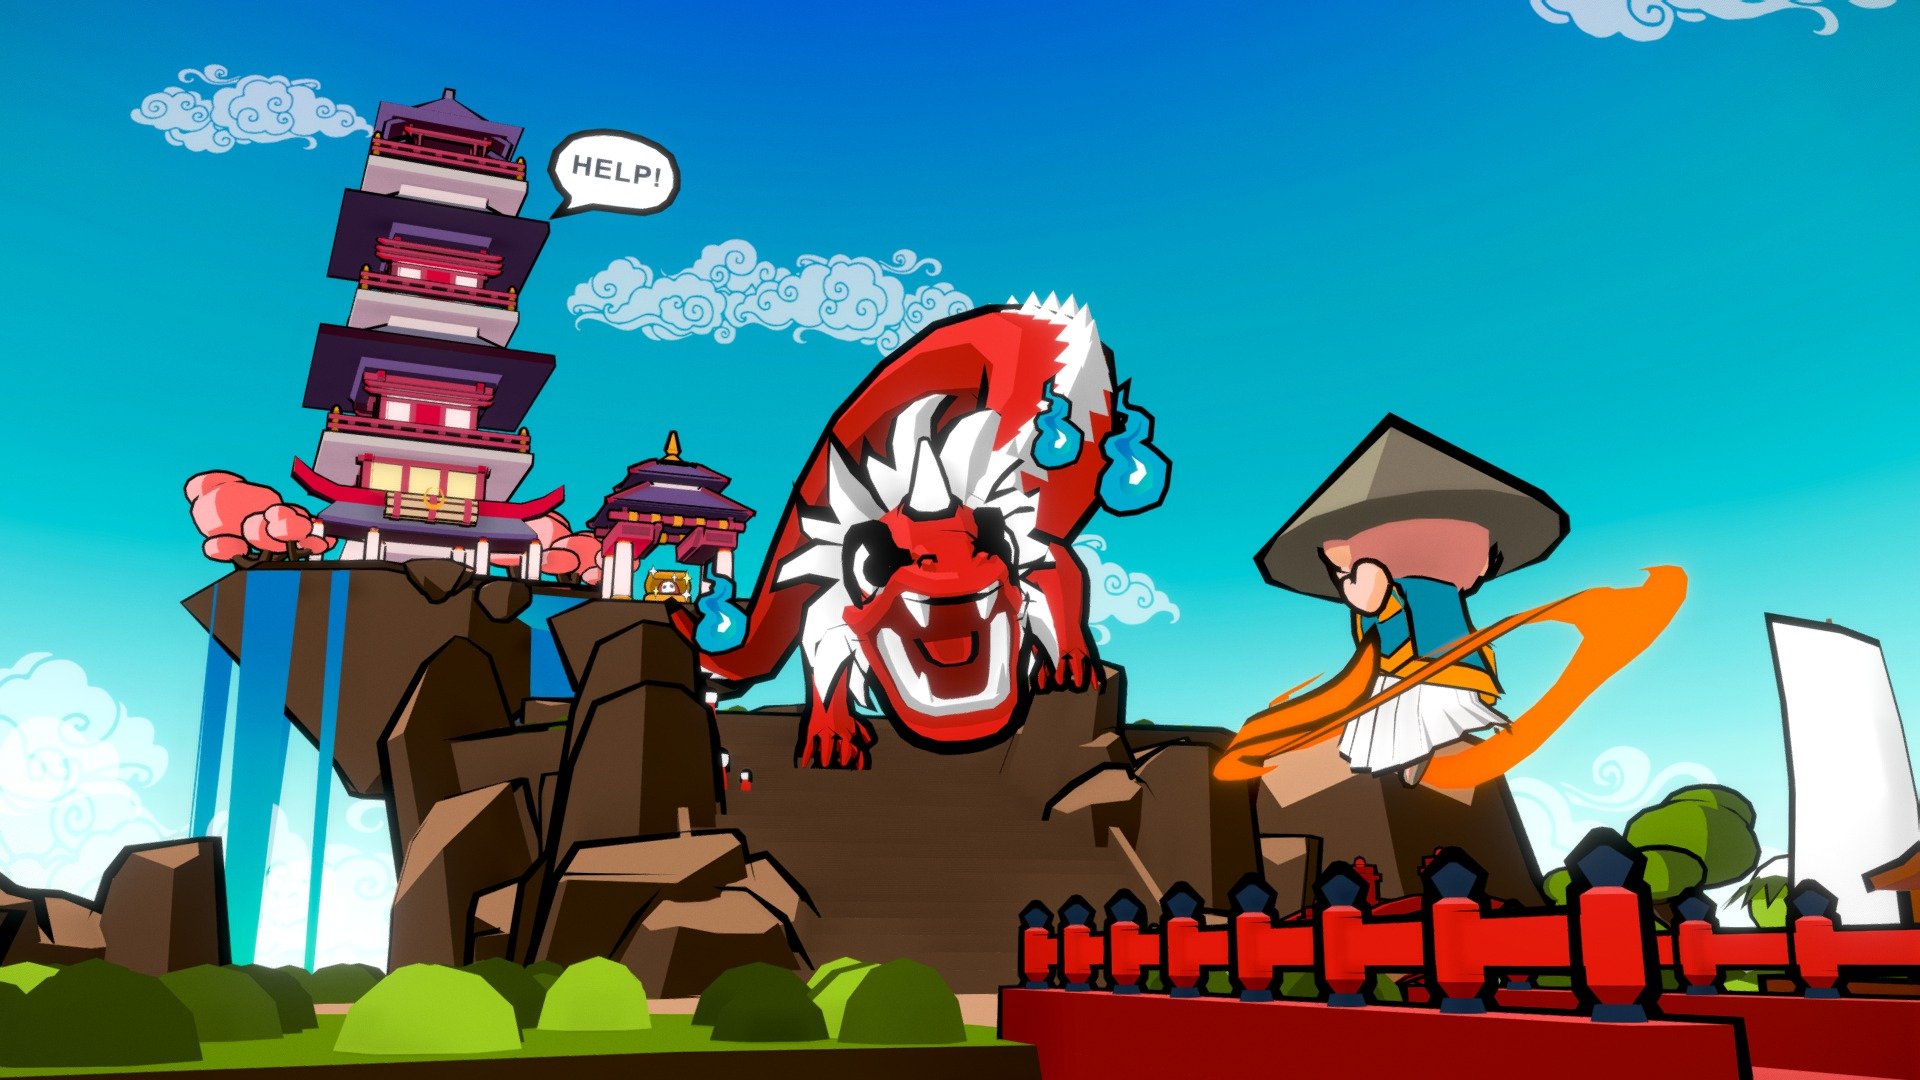 This is my entry for the Low Poly Game Challenge for Sketchfab!

The hero of the game is a brave Monk, surrounded by his KI energy, which is willing to fight the scary Ryuu Dragon to save his friend, trapped at the top of the castle.
In the left side of the screen, there's a Takoyaki shop where you can recharge your energy.
And in the right side, you can find Kappa, a fisherman with whom you can talk to ear prizes.
Get ready and fight the dragon to follow the path and get the Daruma item. That's the only way to get inside the castle, which is floating in the blue sky air above furious sea.

It was modeled and assembled with Maya.
For this scene, I used a few textures, for the sky, sea and caustic, made with Photoshop. Besides these textures, everything is just flat color shader to achieve the toon look.

Hope you like it!
Cheers.

Submission deadline in Monday, February 3, 2020.

GameLevelChallenge 3d model